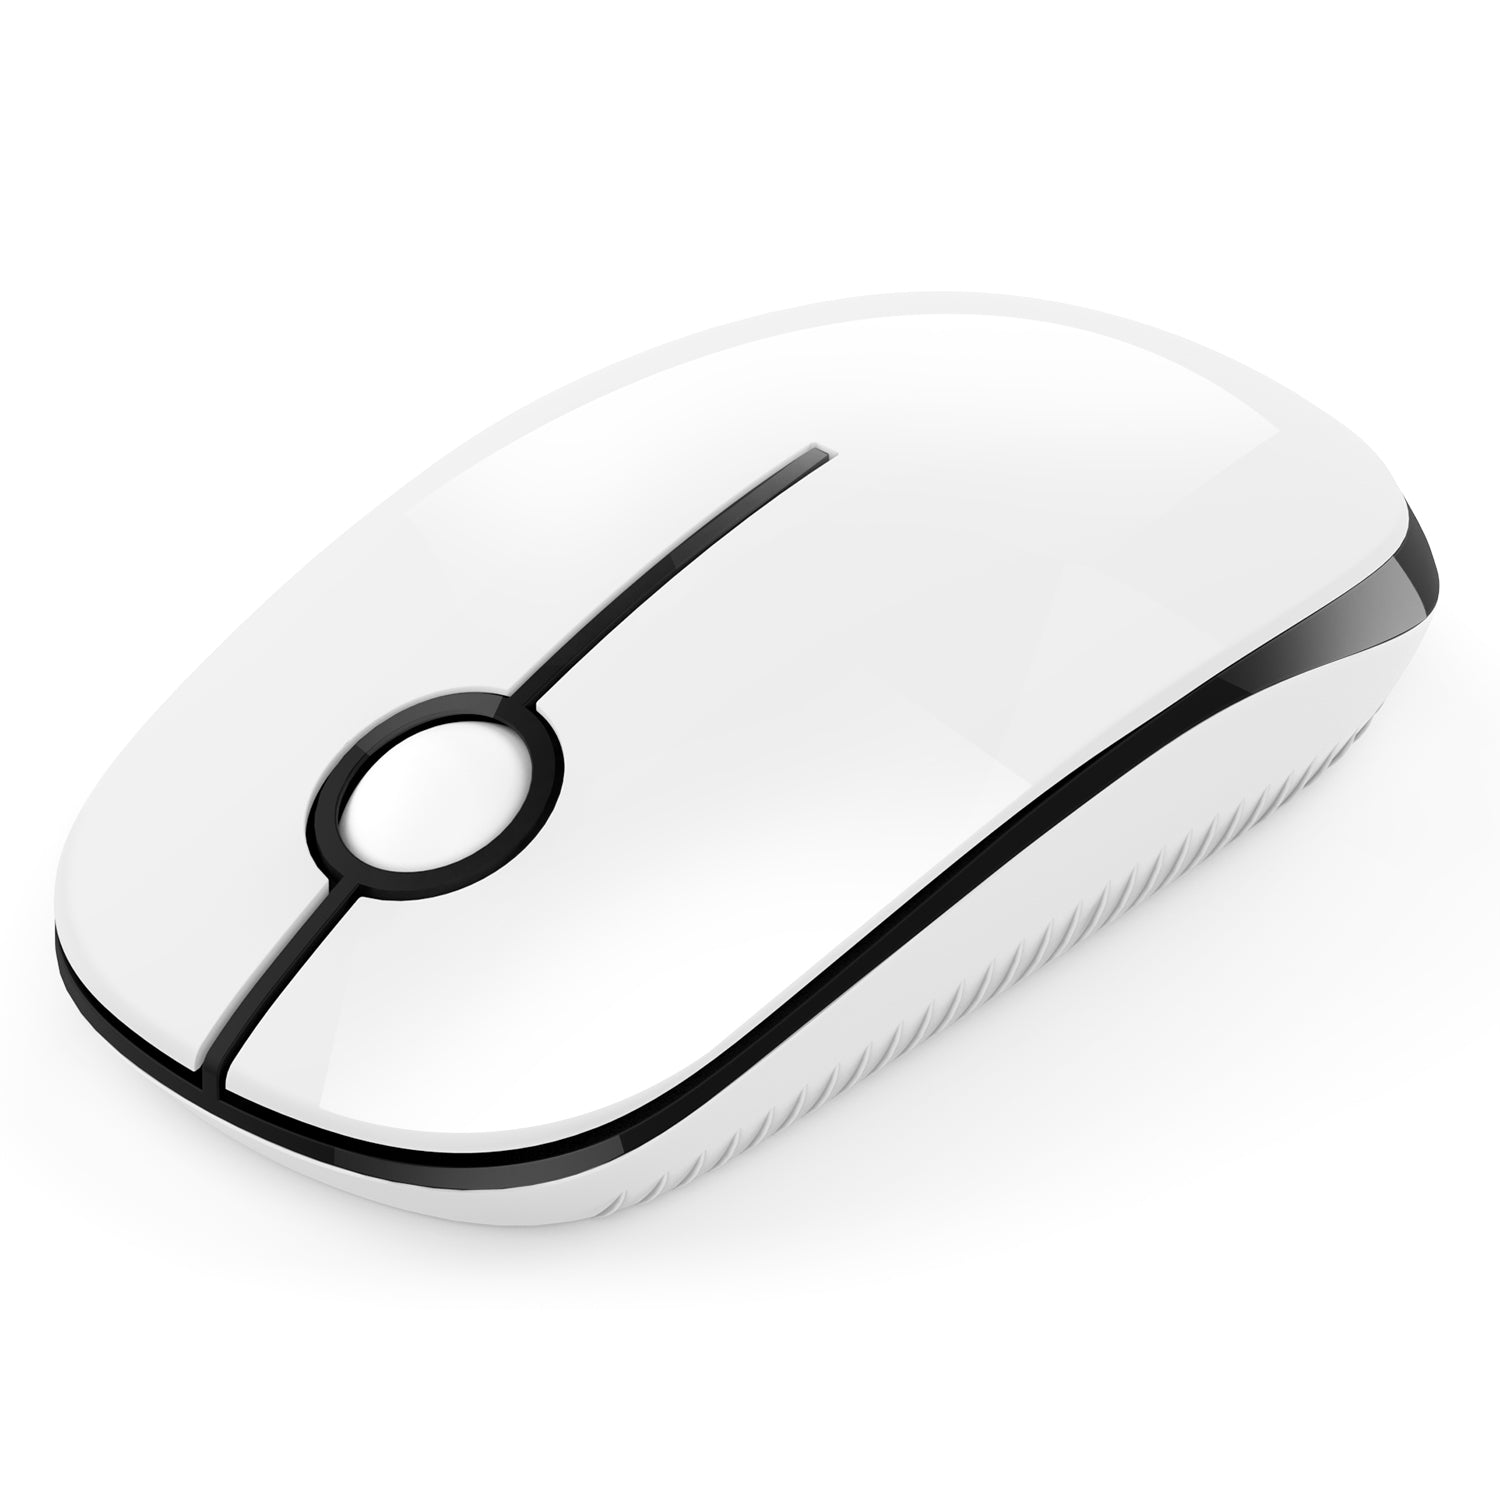 MS001 Slim Wireless Mouse